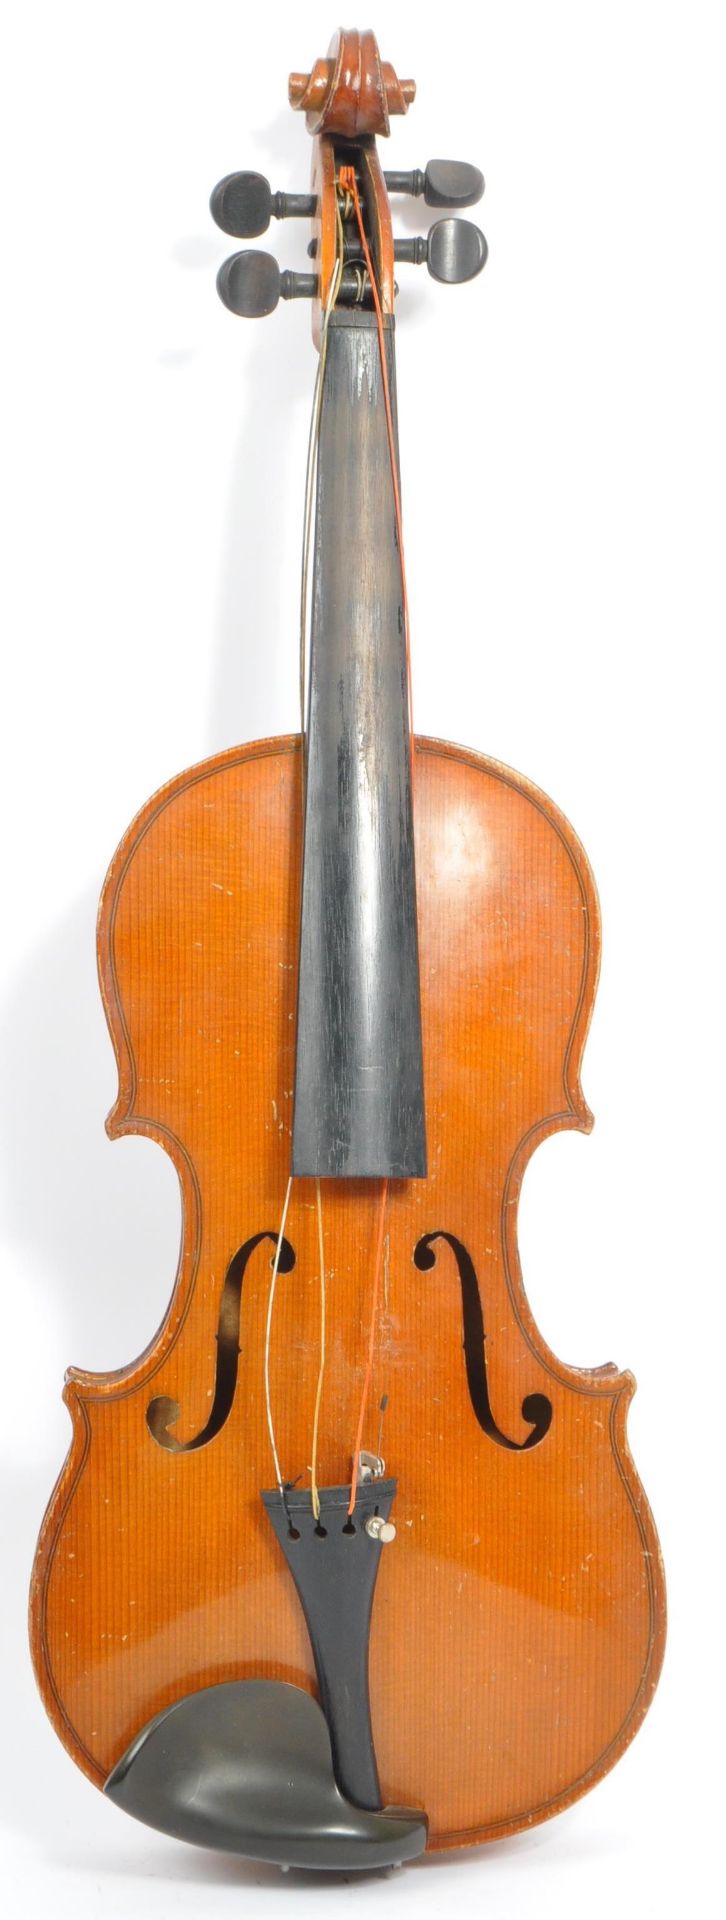 EARLY 20TH CENTURY GERMAN VIOLIN LABELLED D.R.G.M 728940 - Image 2 of 10